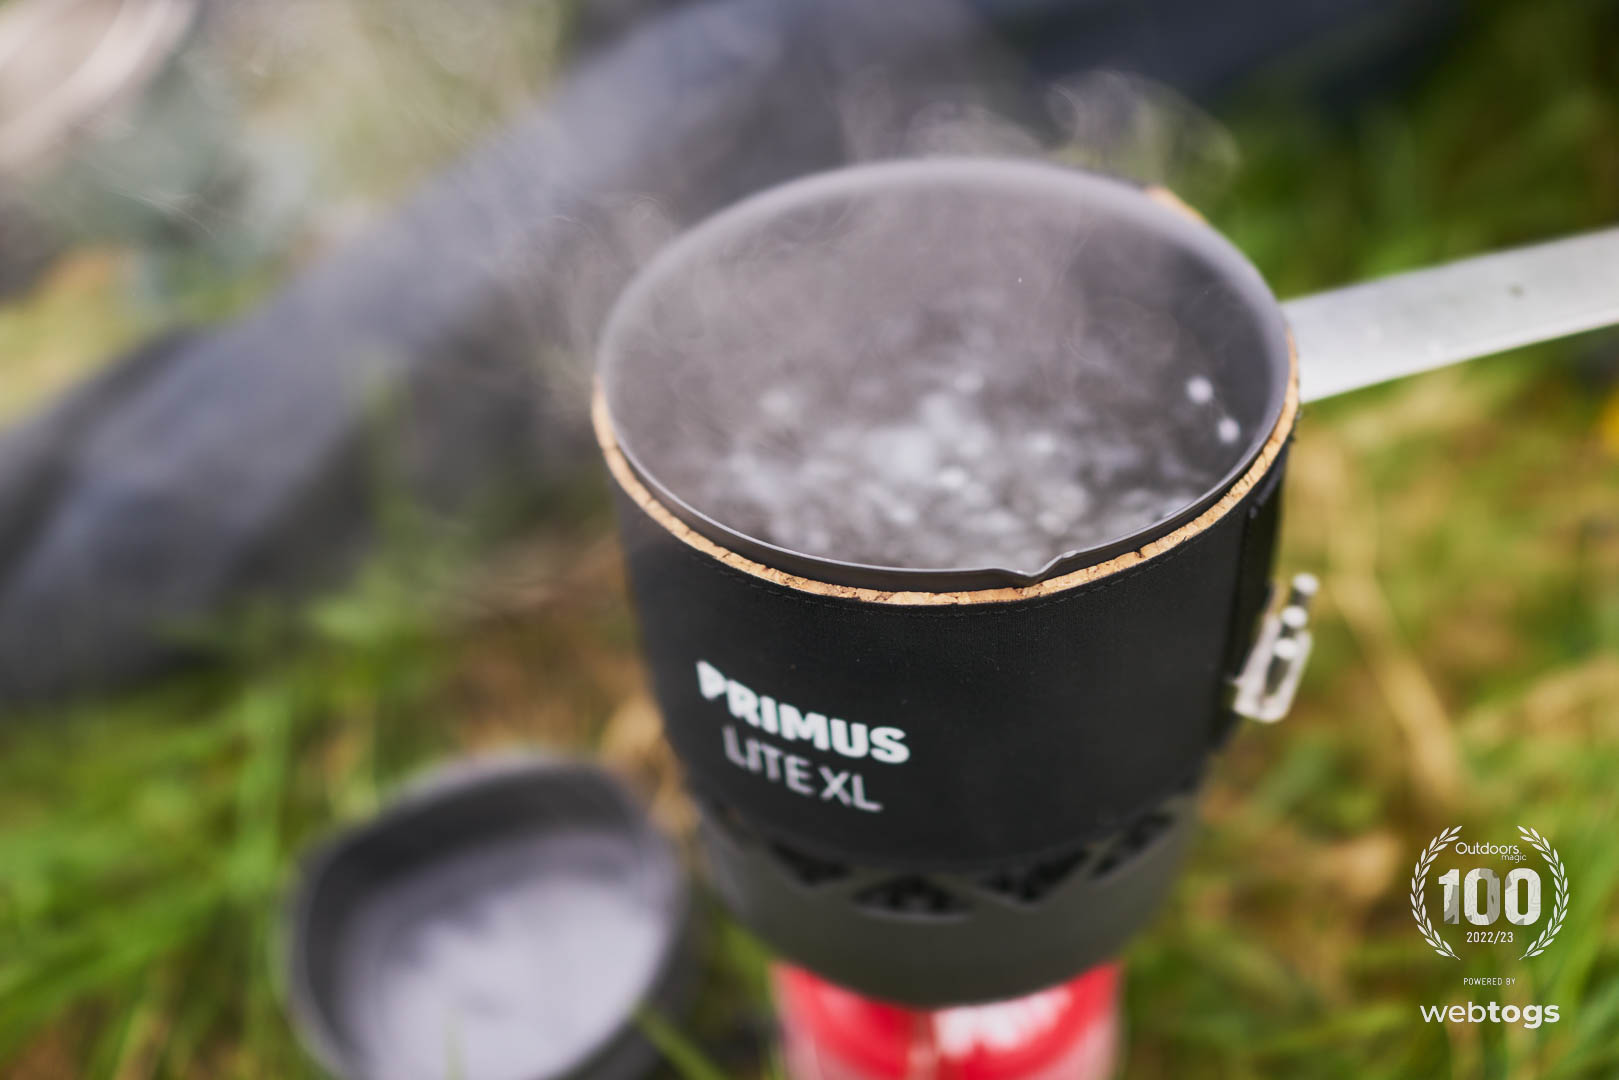 Primus Lite XL Backpacking Stove | Review